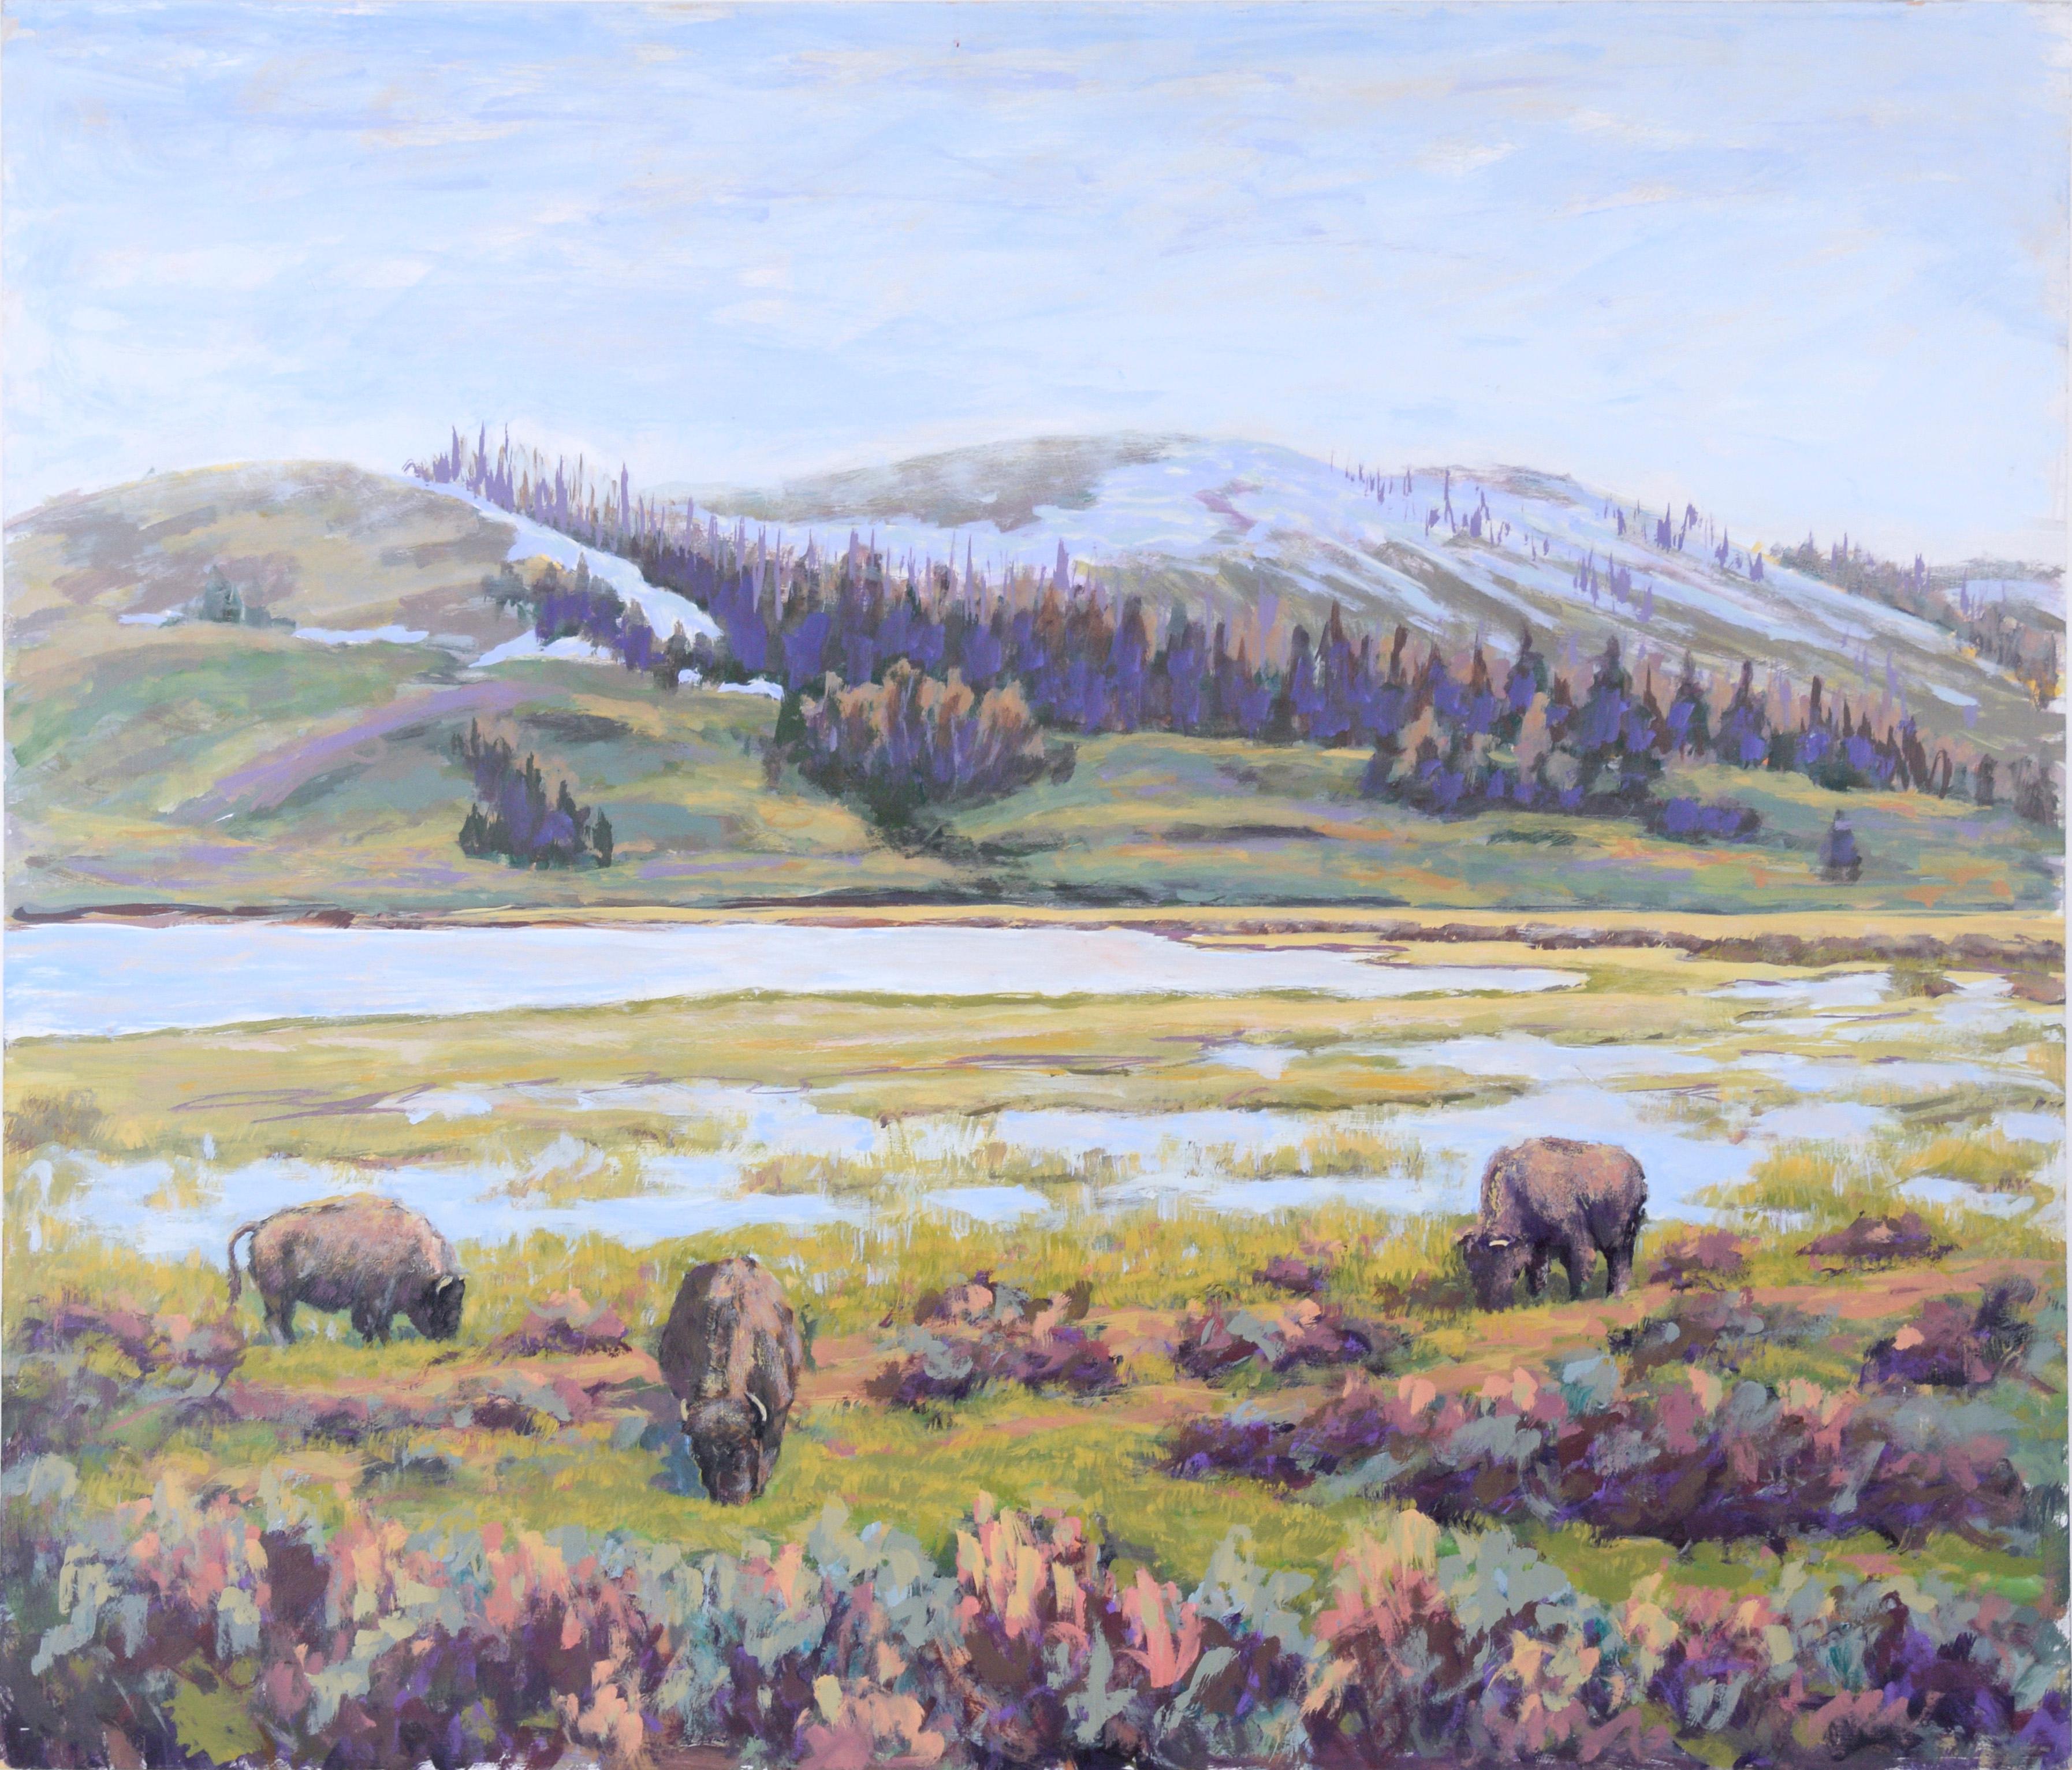 Nick White Landscape Painting - Bison in the Spring Thaw - Western Plein Aire Landscape in Acrylic on Board